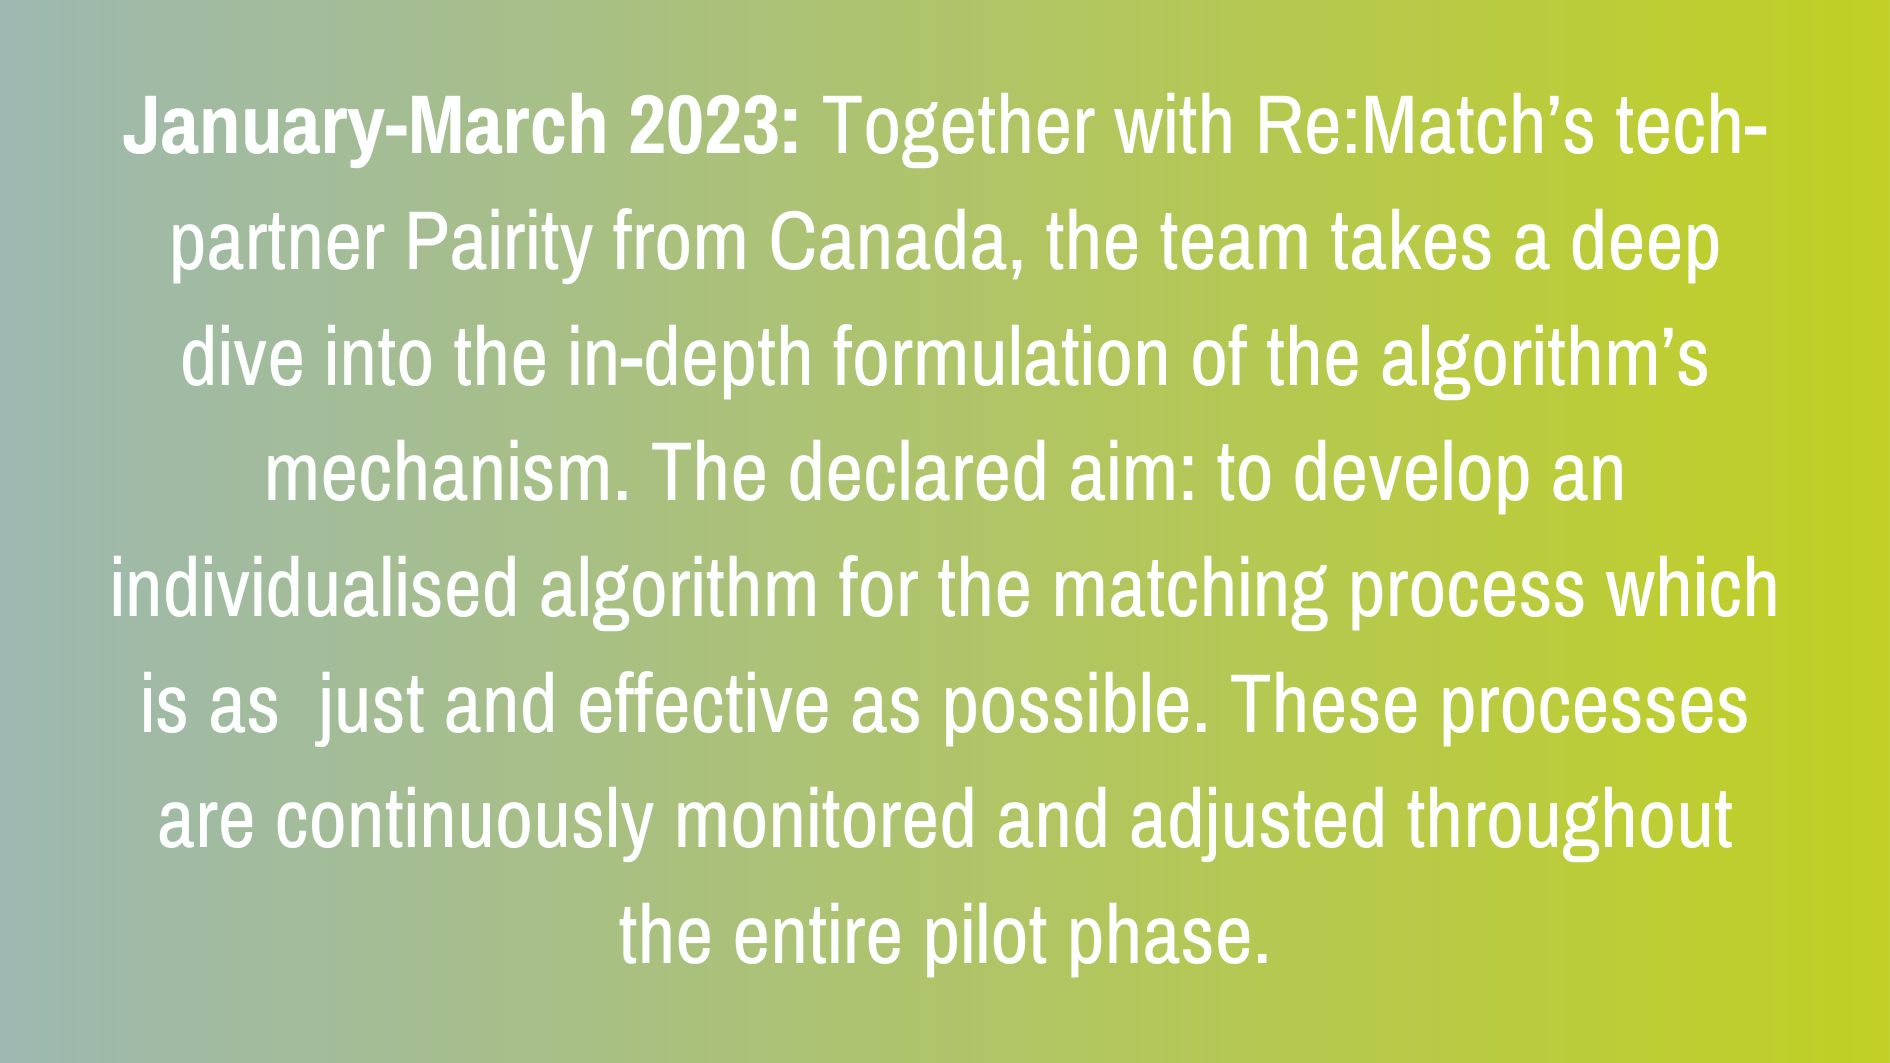 January-March 2023: Together with Re:Match’s tech-partner Pairity from Canada, the team takes a deep dive into the in-depth formulation of the algorithm’s mechanism. The declared aim: to develop an individualised algorithm for the matching process which is as just and effective as possible. These processes are continuously monitored and adjusted throughout the entire pilot phase.